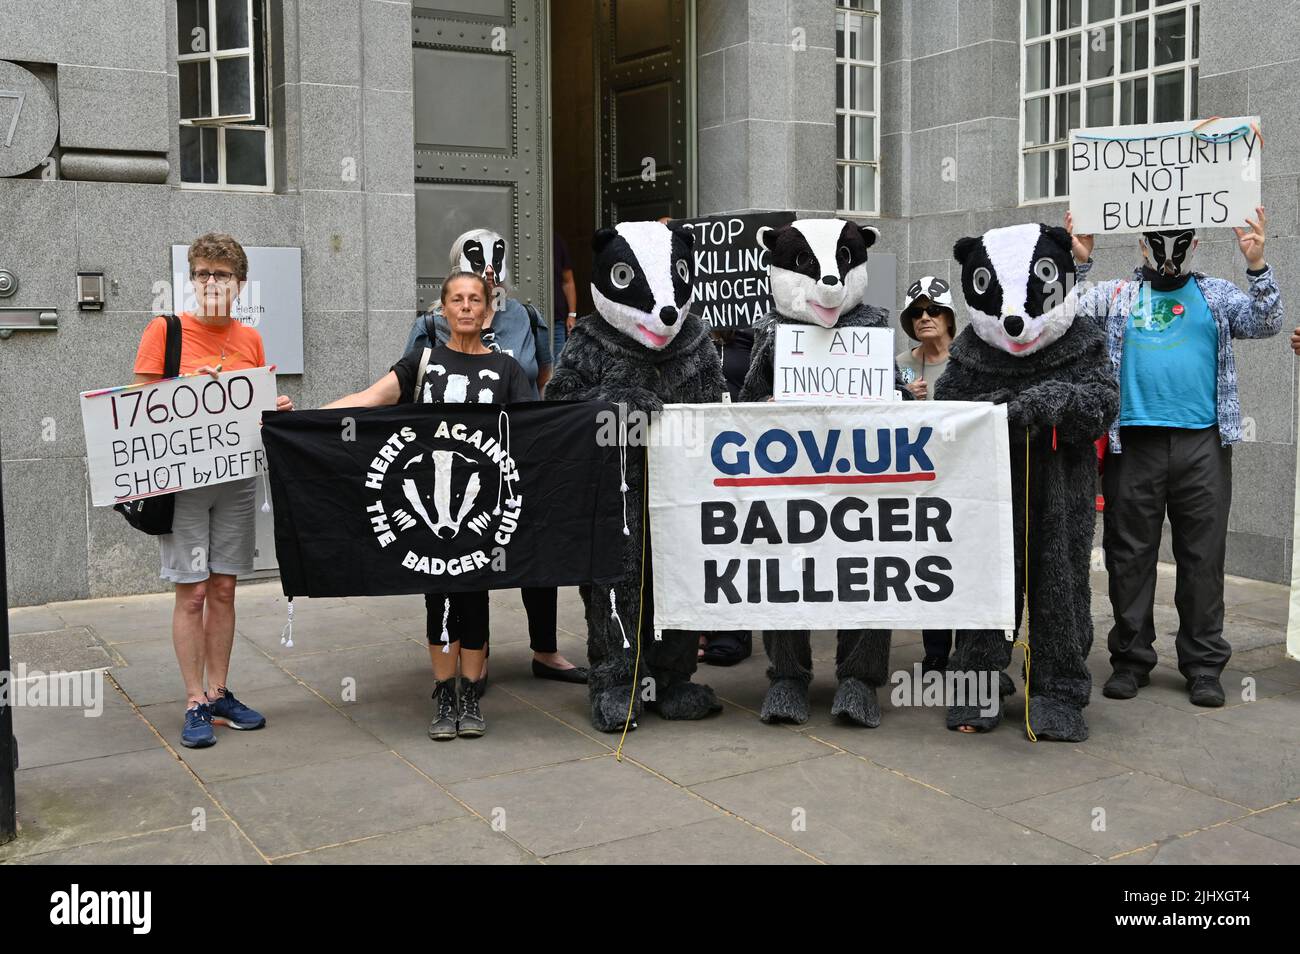 DEFRA, London, UK. 21st July, 2022. Animal rights protestors against the ongoing horror of the cruel, pointless #badger culls equal legal slaughter badgers 176,000 badgers shot annually by DEFRA. Credit: See Li/Picture Capital/Alamy Live News Stock Photo